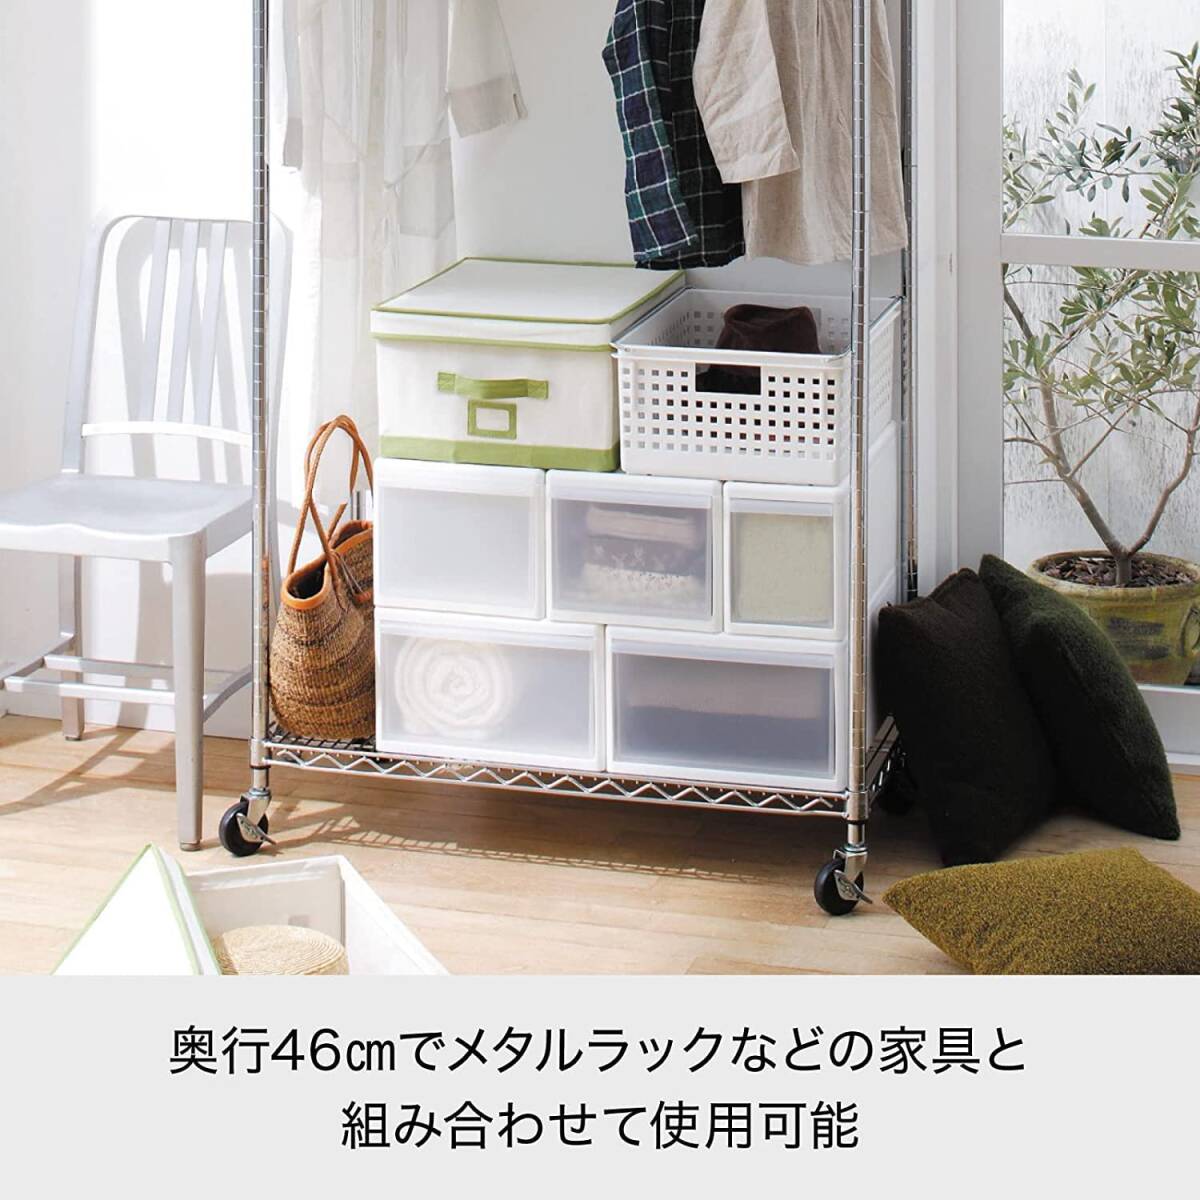  Like ito( like-it ) clothes storage drawer case combination . possible to use storage case wide M white made in Japan MOS-03 inside 